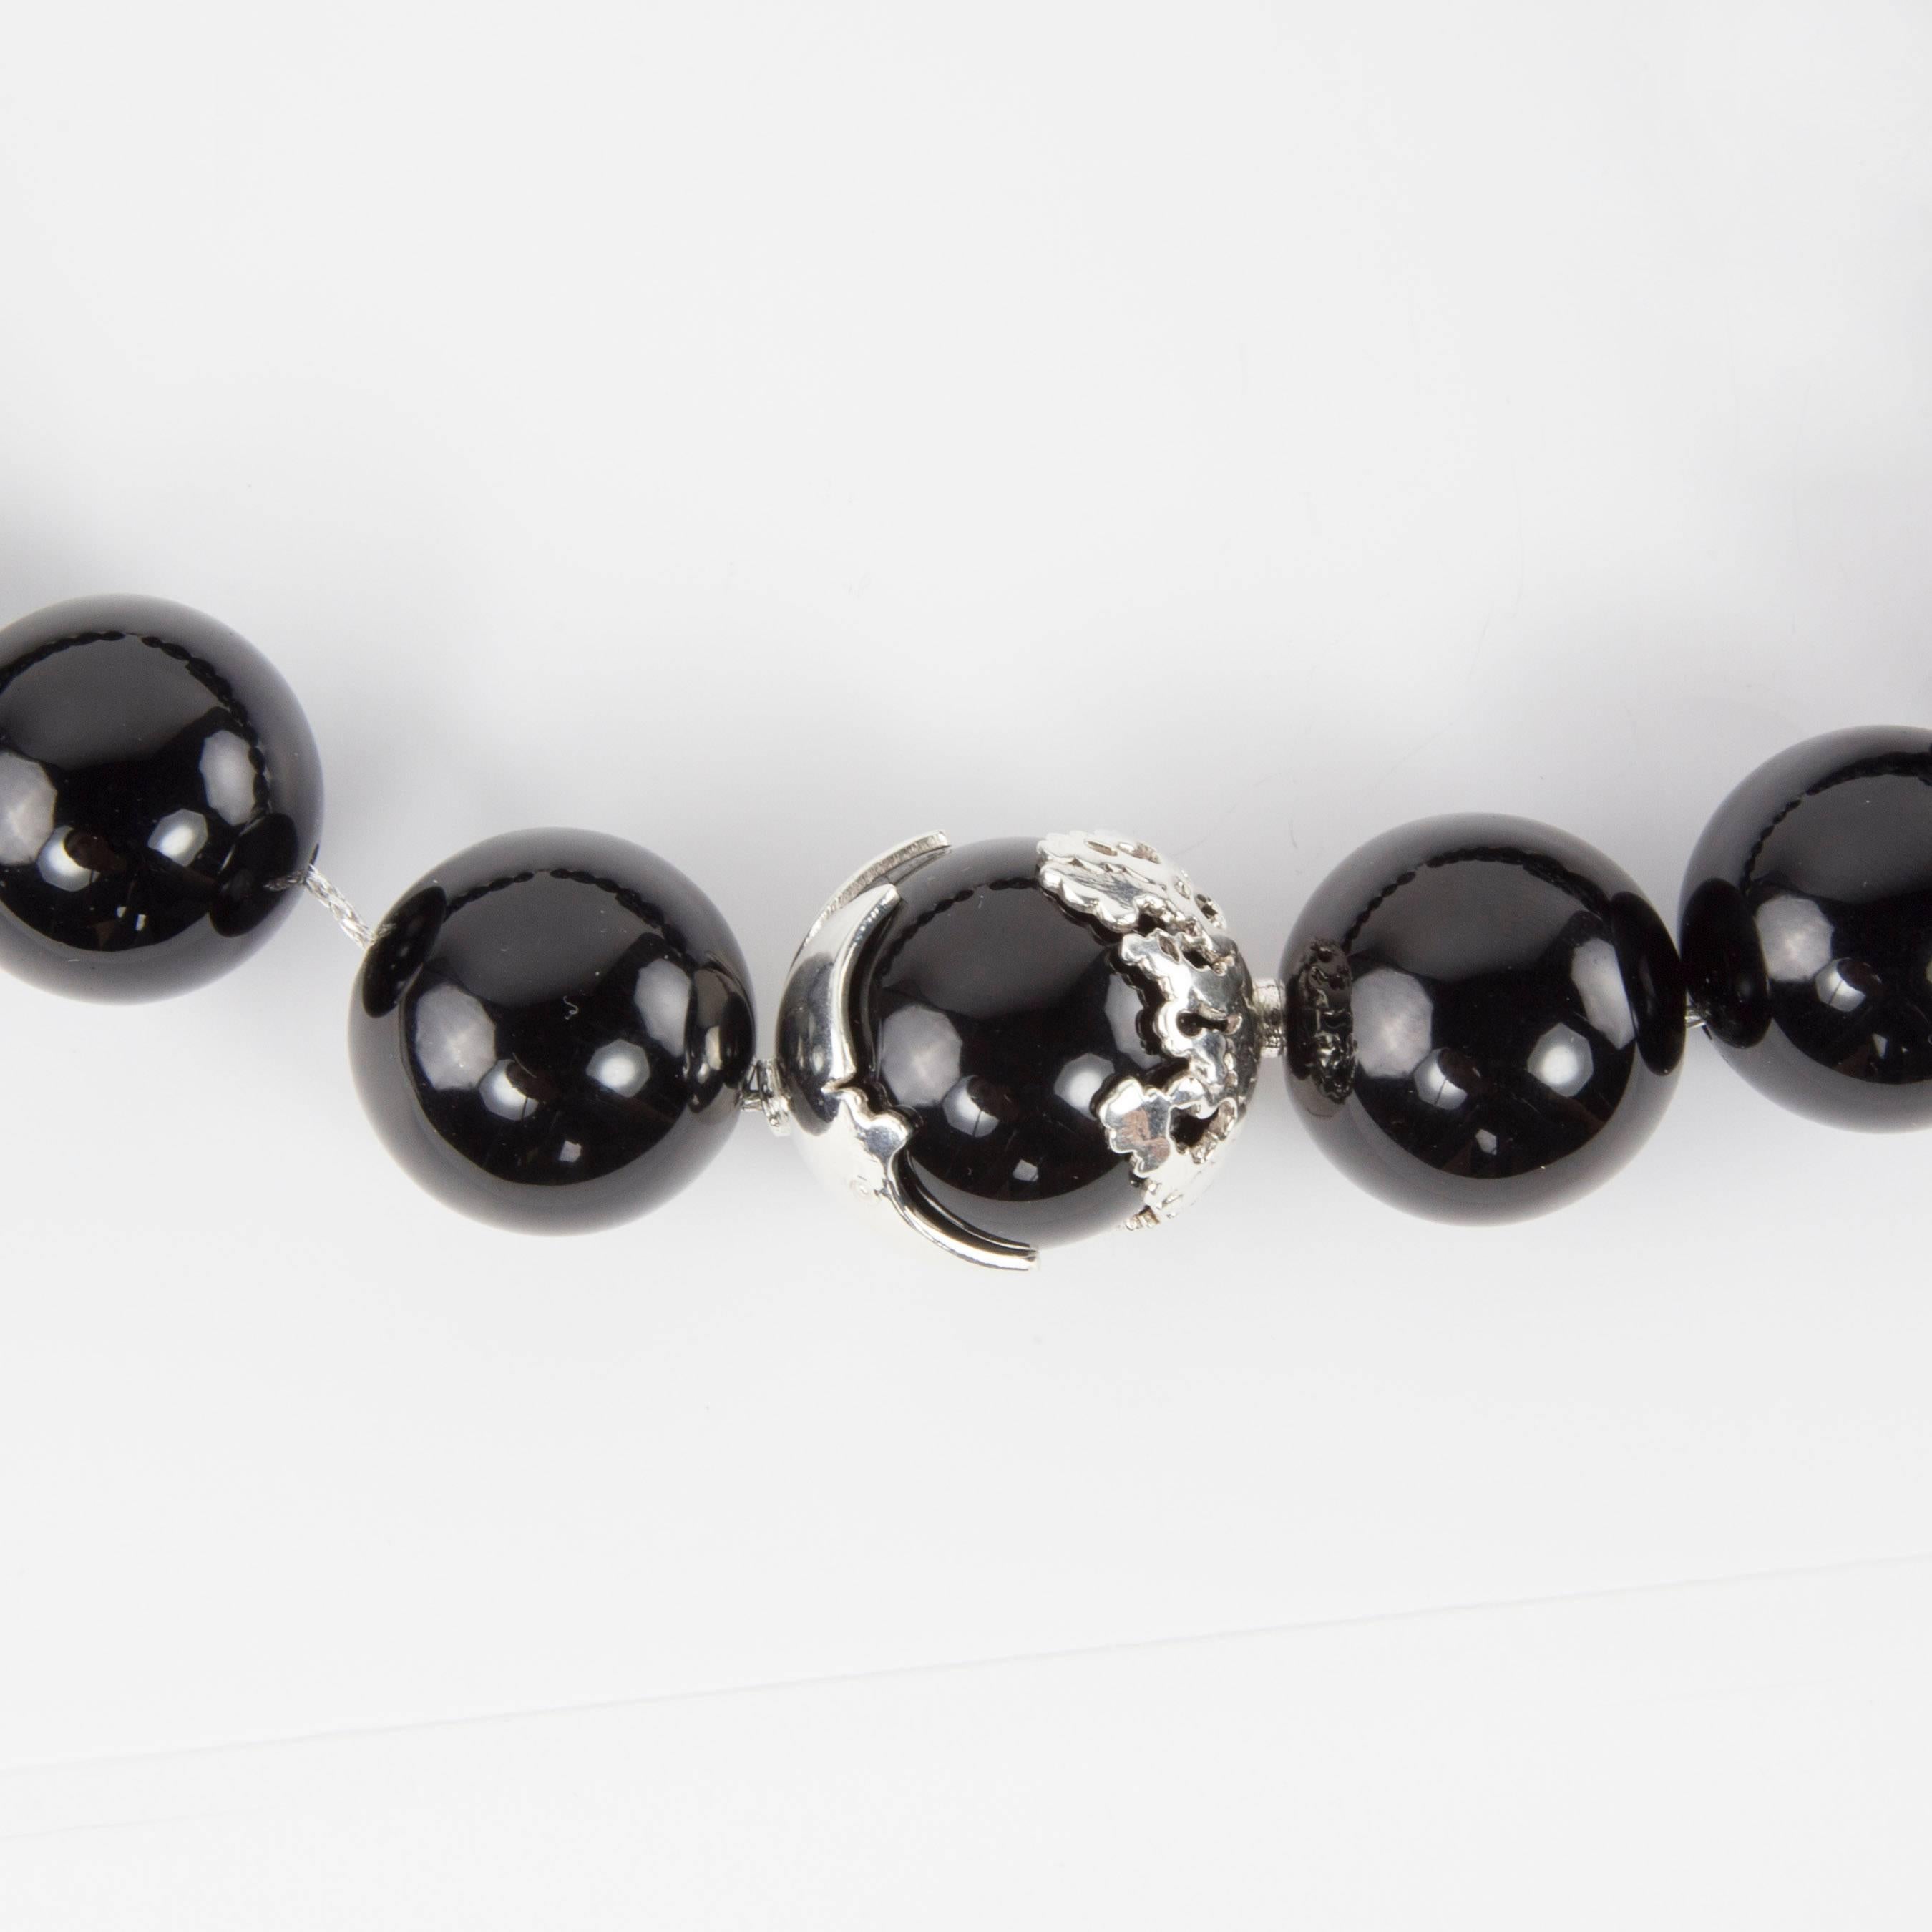 Beautiful Black Onyx Necklace, comprising twenty-one 20mm beads; center bead enhanced either side with decorative Sterling Silver elements, reflecting the moon and stars. Modern and unique, a necklace you'll love to wear every day, Day or Night!
